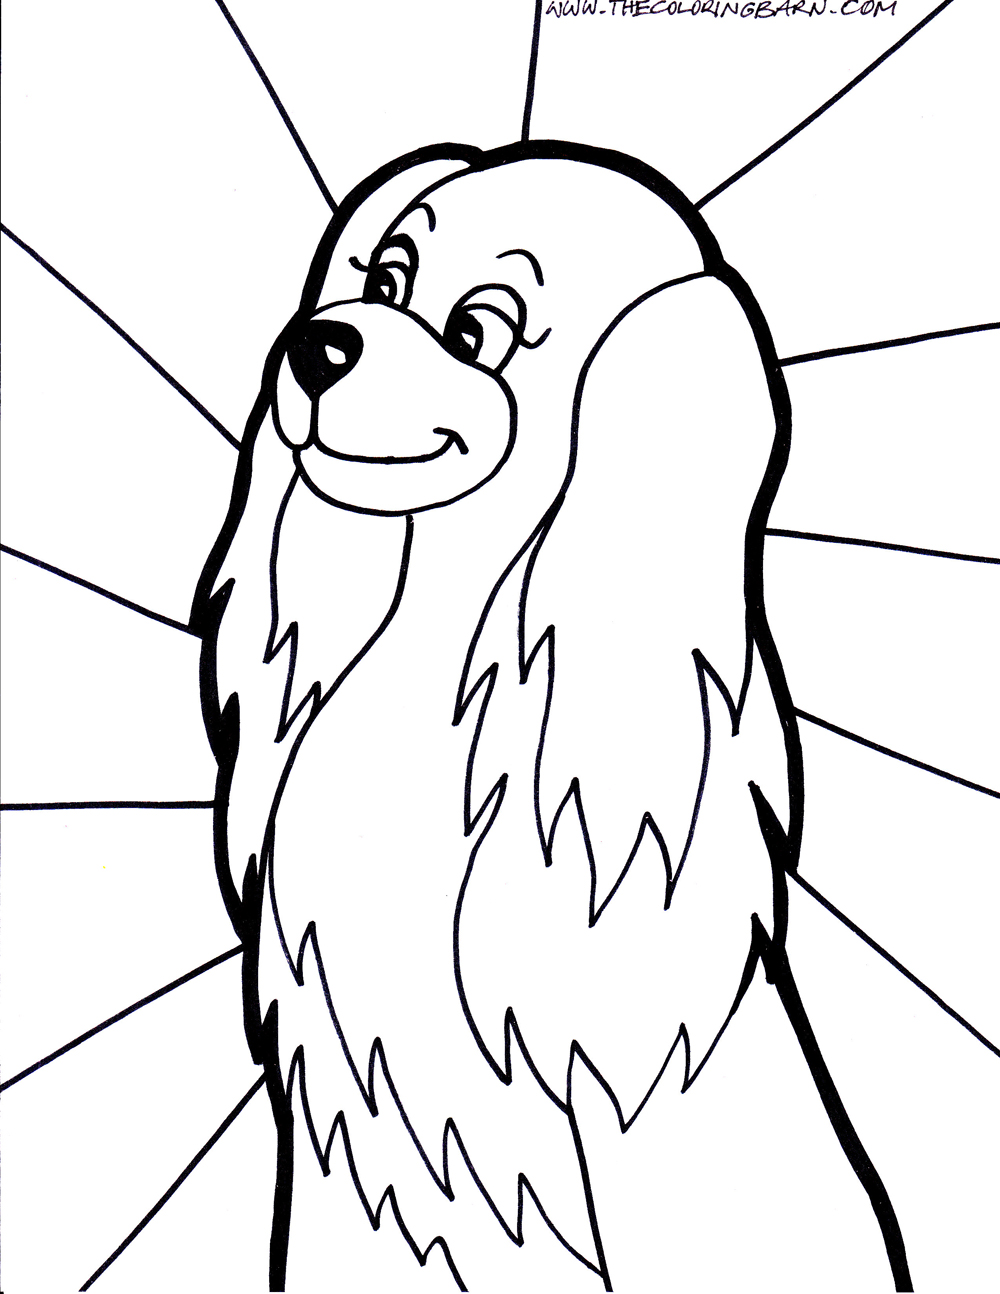 Trends For > Coloring Pages Of Cute Puppies To Print